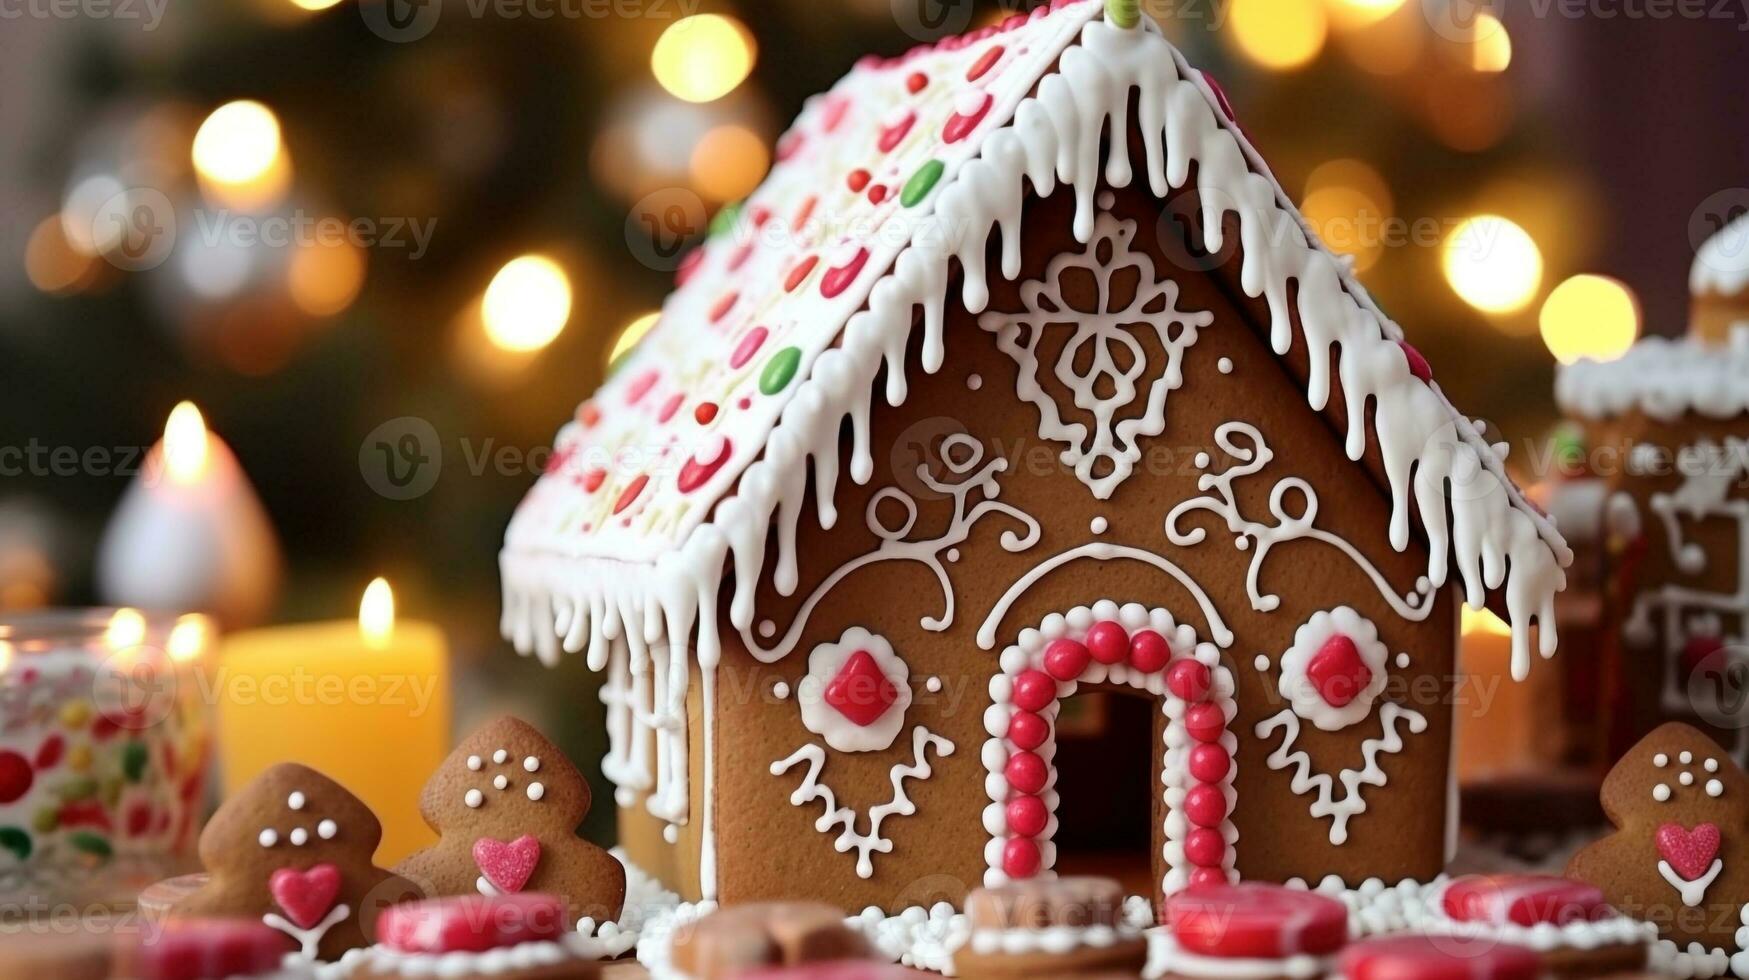 A close-up of a gingerbread house, christmas image, photorealistic illustration photo